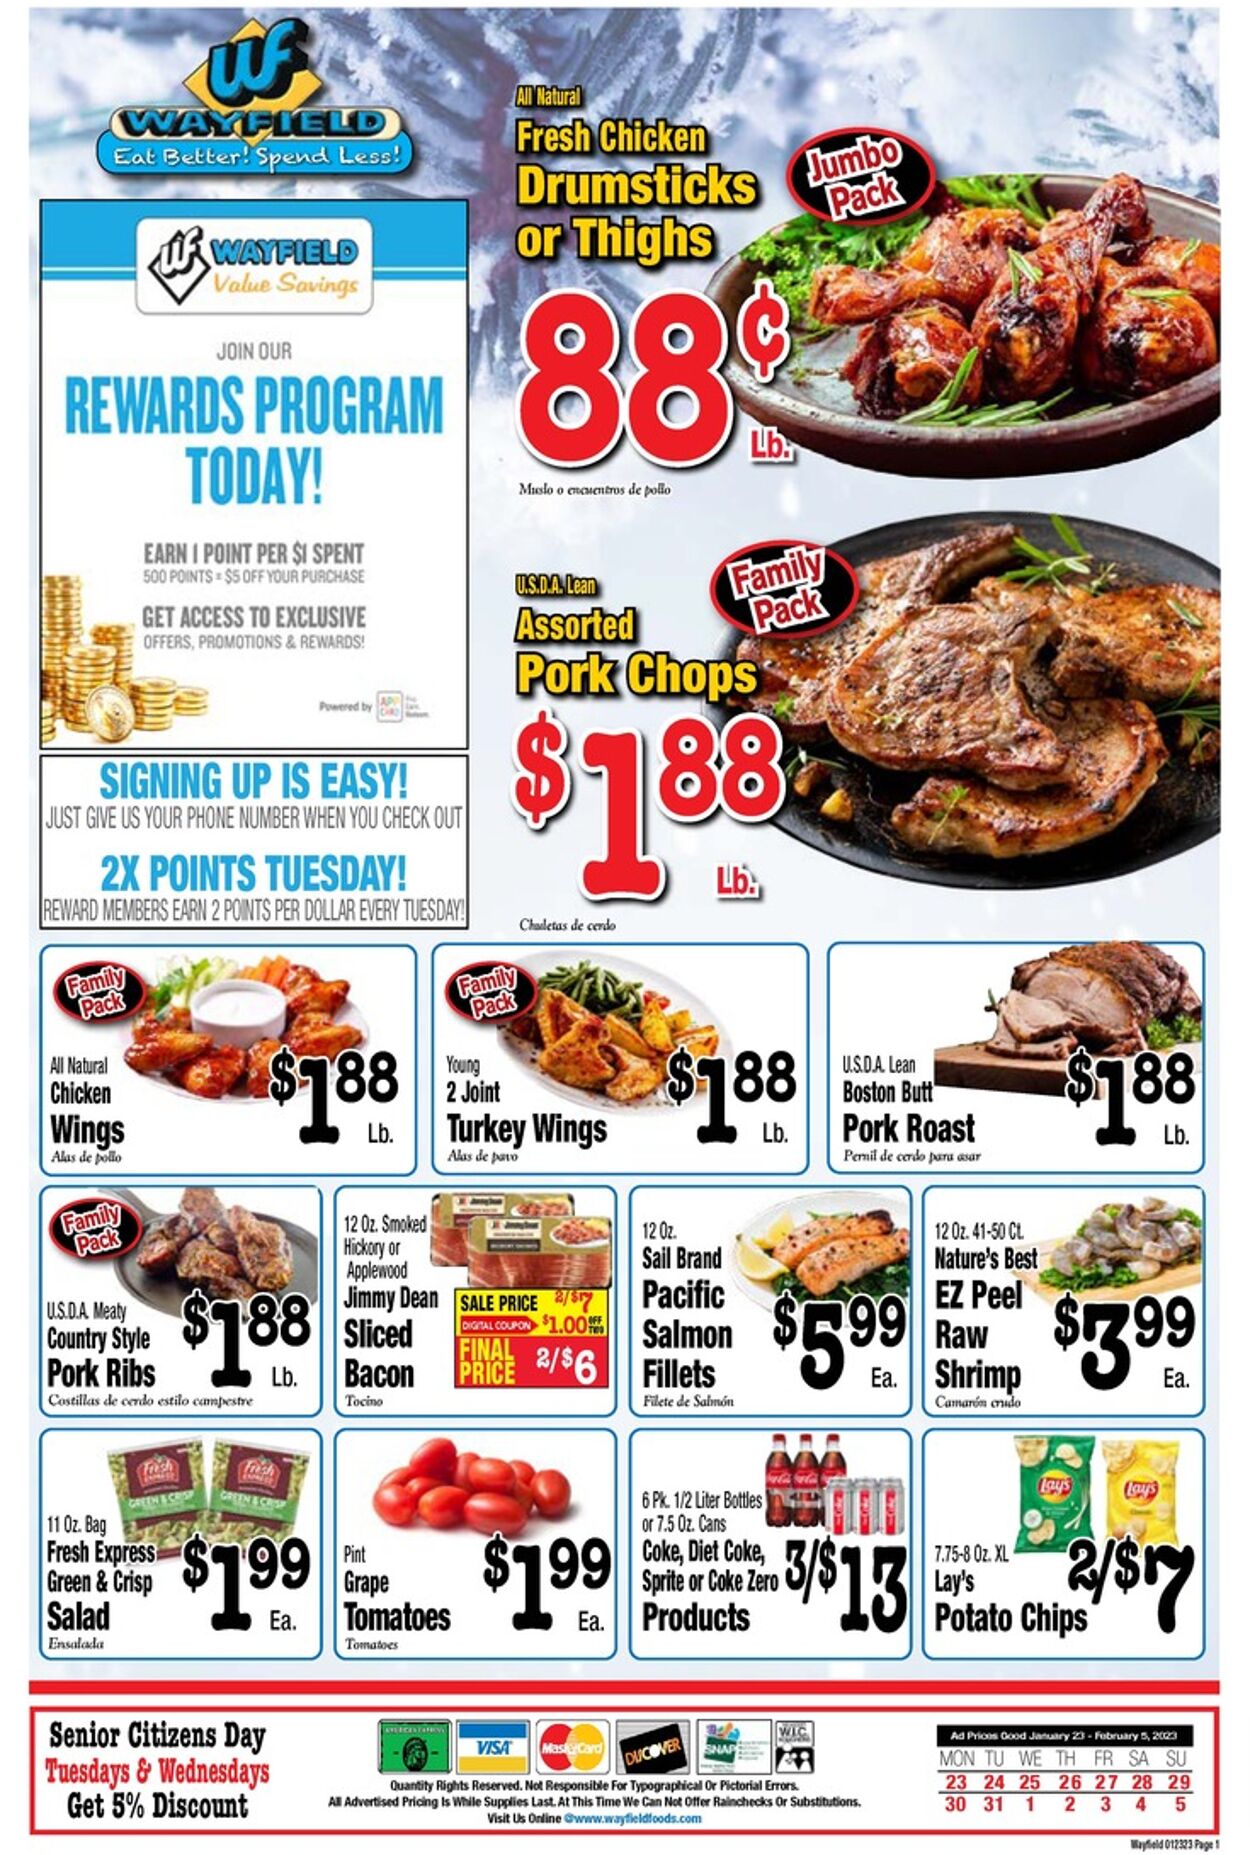 Wayfield Promotional weekly ads